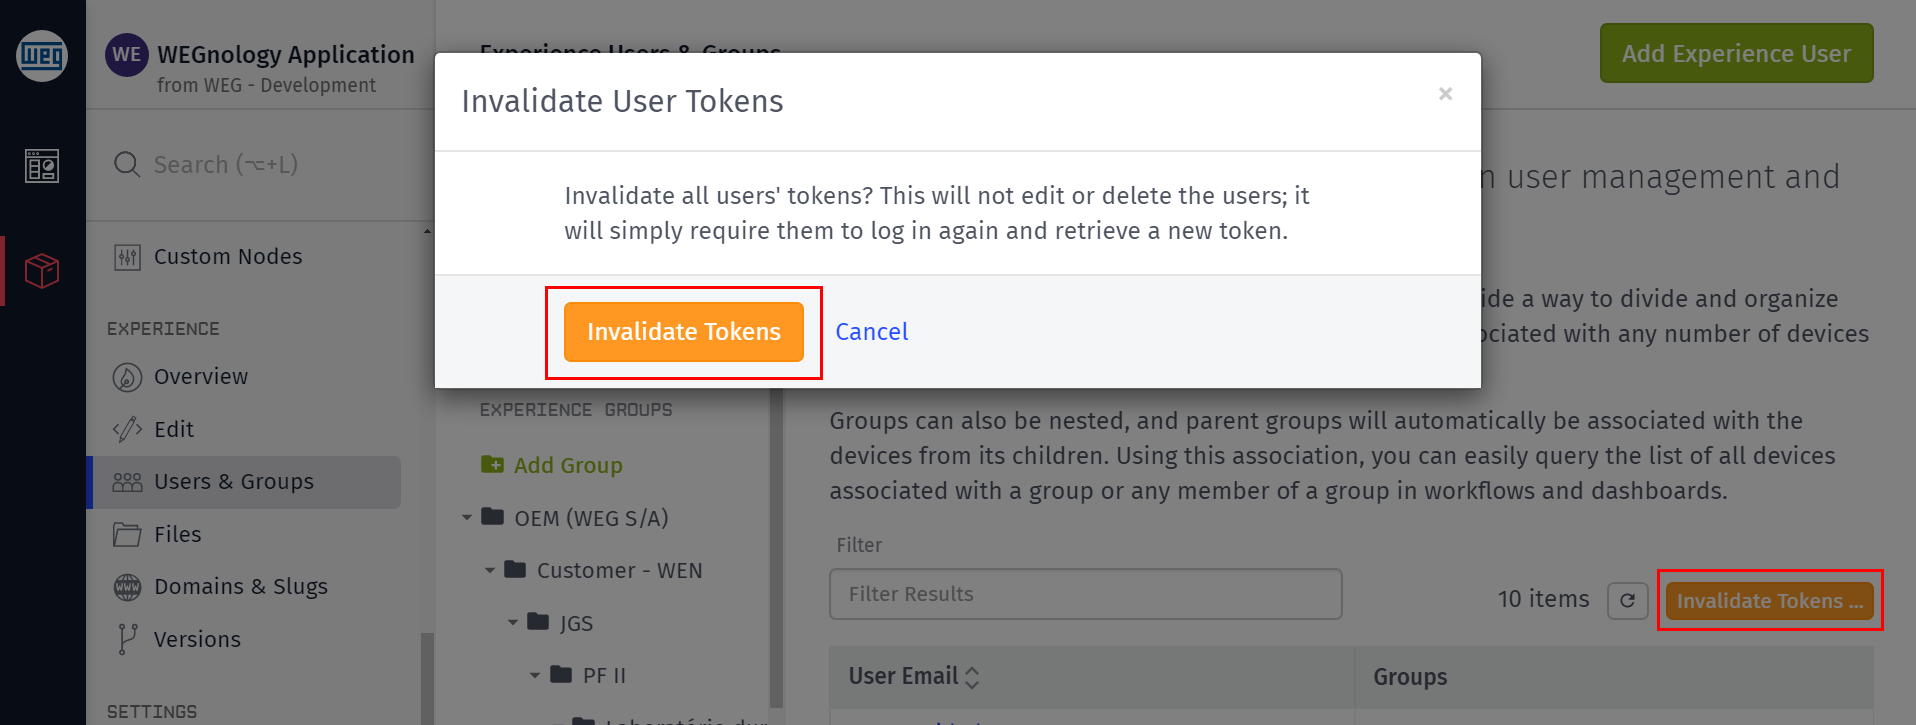 Invalidate Users Tokens